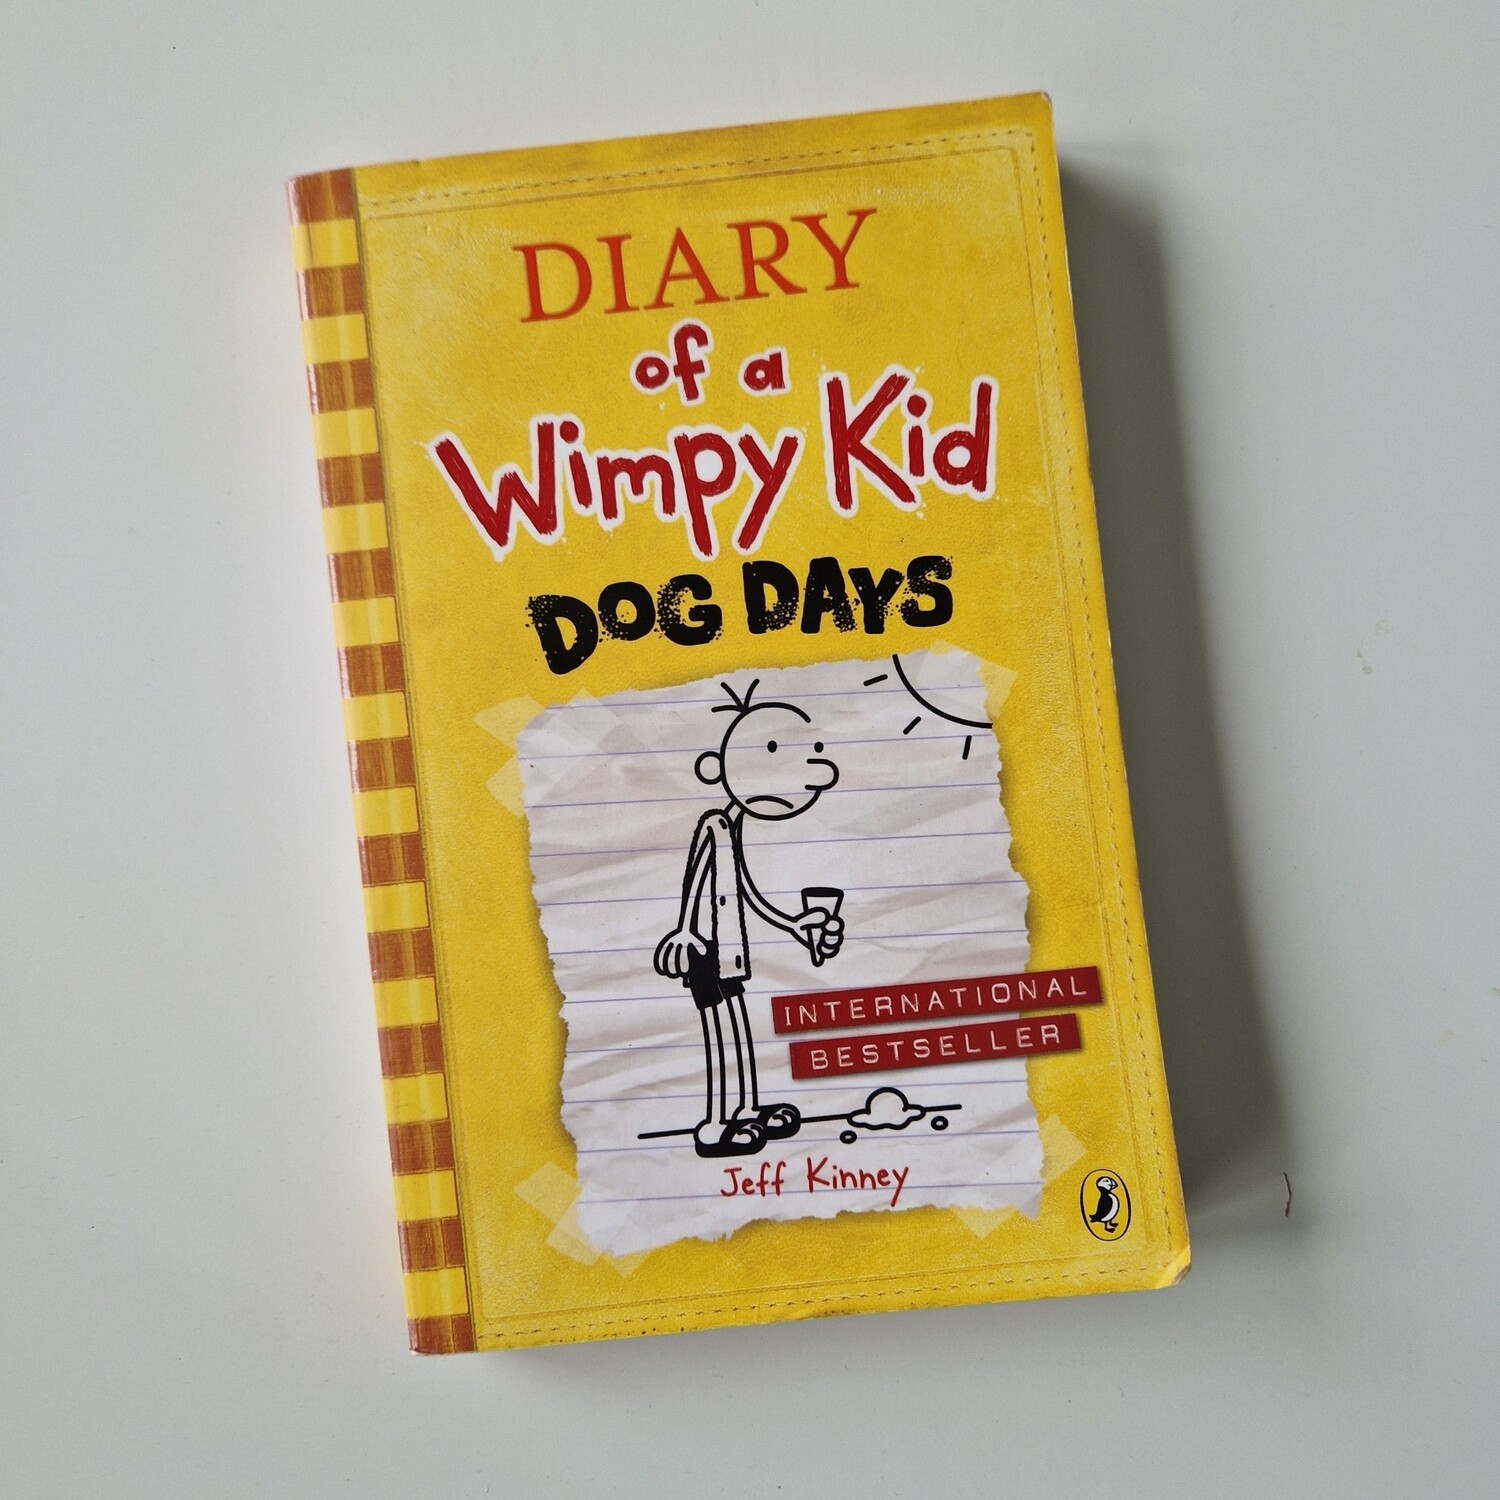 Diary of a Wimpy Kid - Dog Days - made from a paperback book - metal book corners included